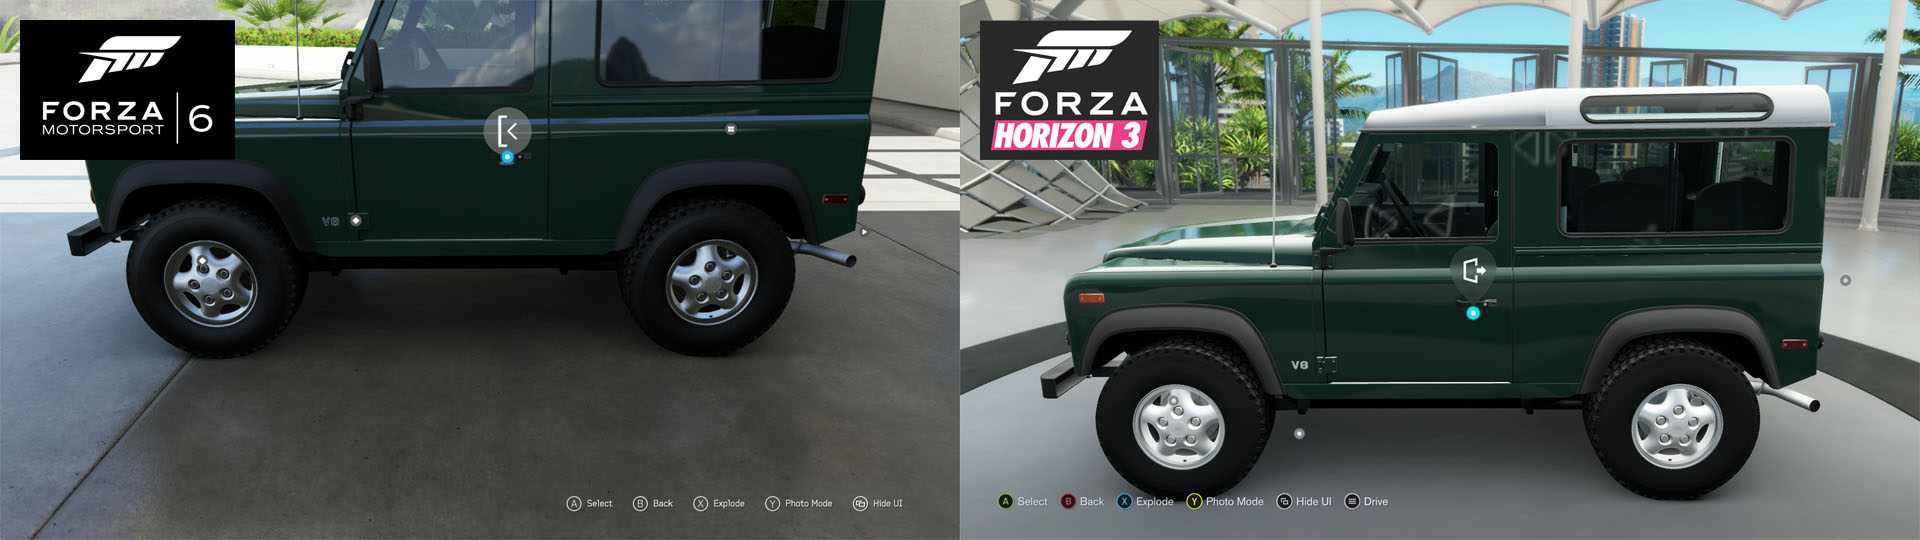 The camera position is a bit higher in Forza Horizon 3 (right),
 which keeps larger vehicles more centered on the screen than they were in Forza Motorsport 6 (left).